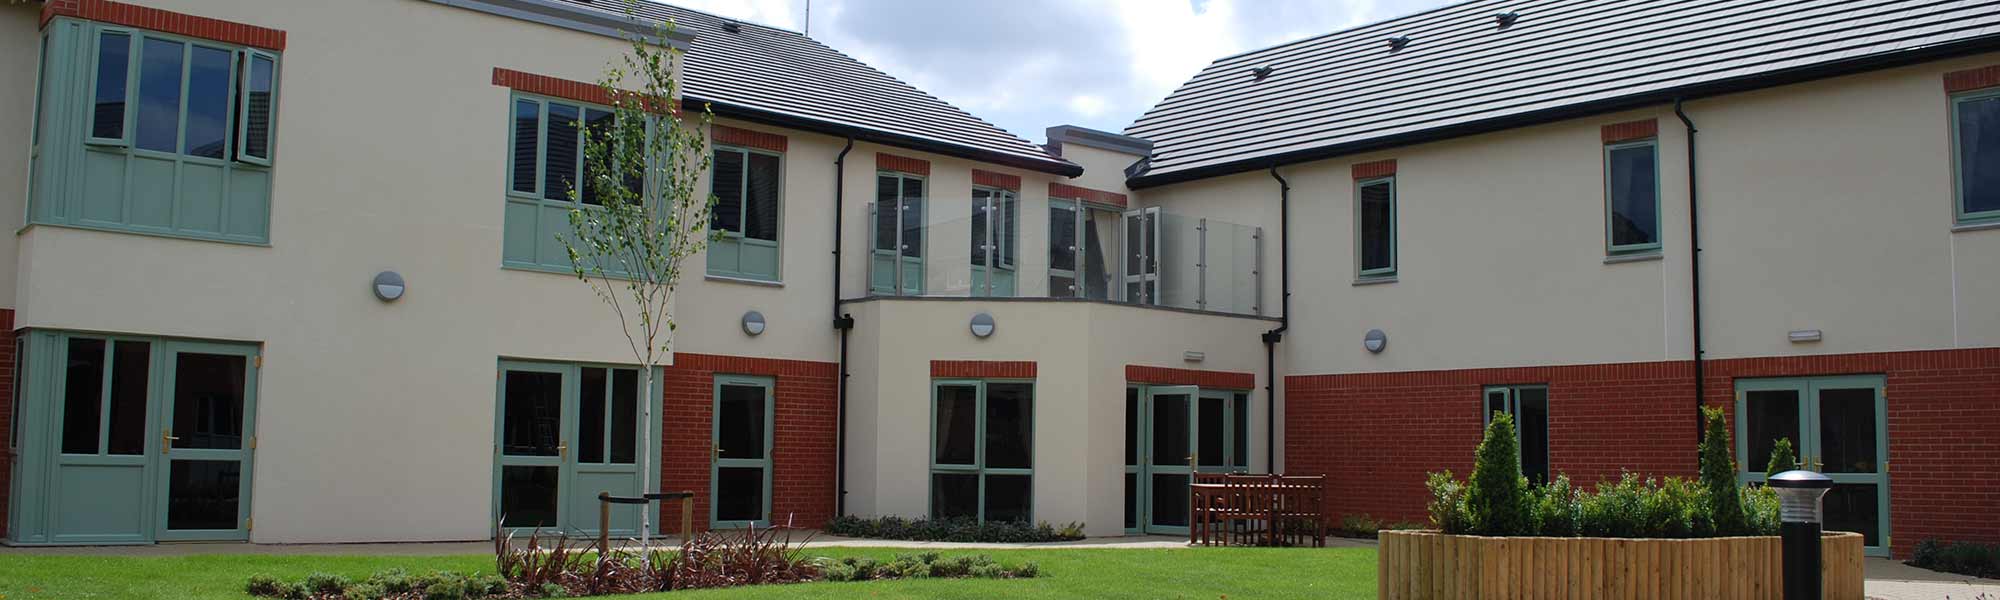 Newcross Care Home in Wolverhampton